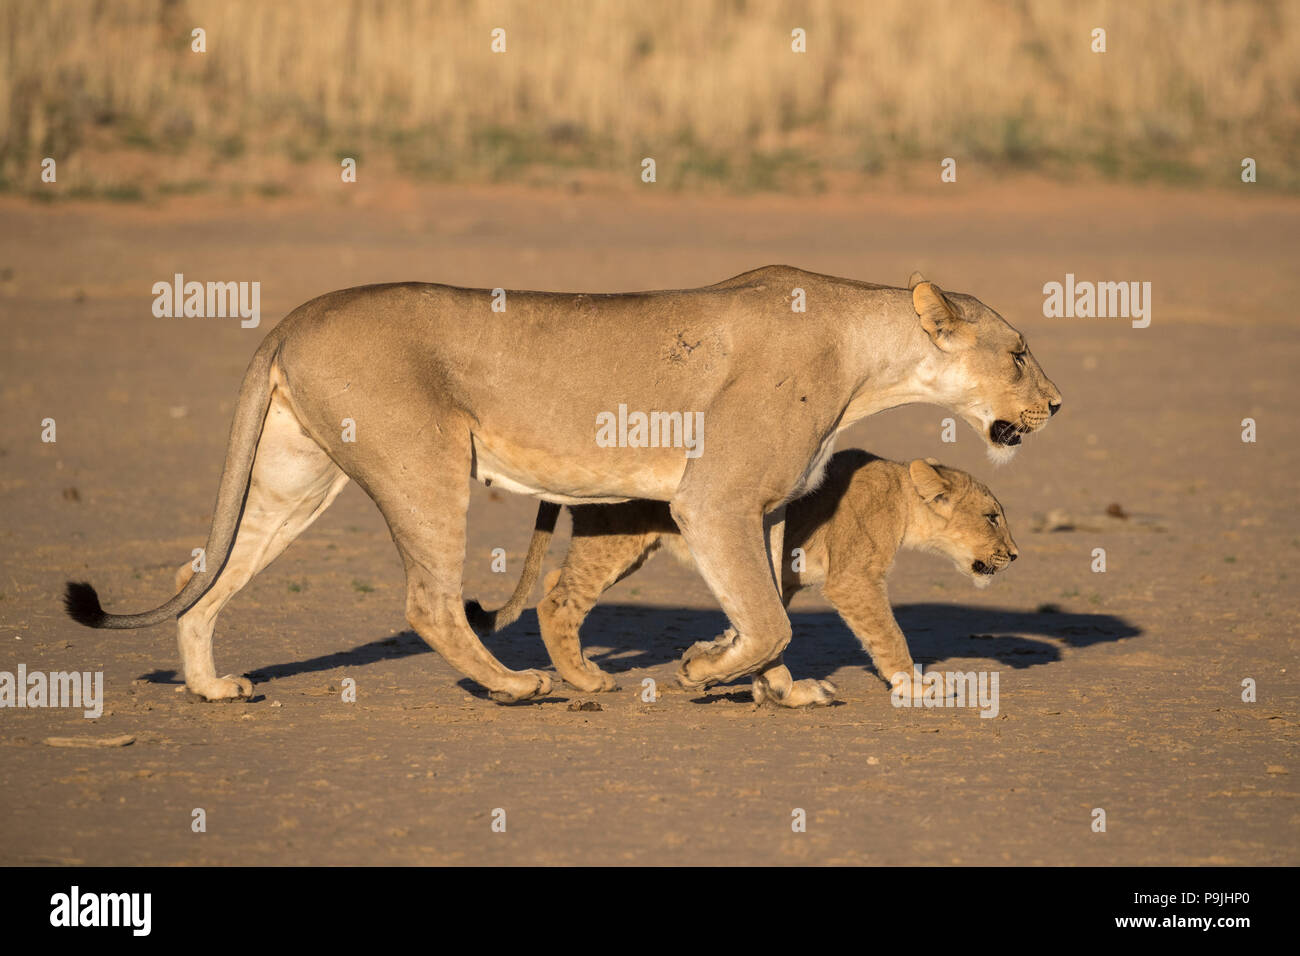 Lioness with cub (Panthera leo), Kgalagadi Transfrontier Park, South Africa Stock Photo